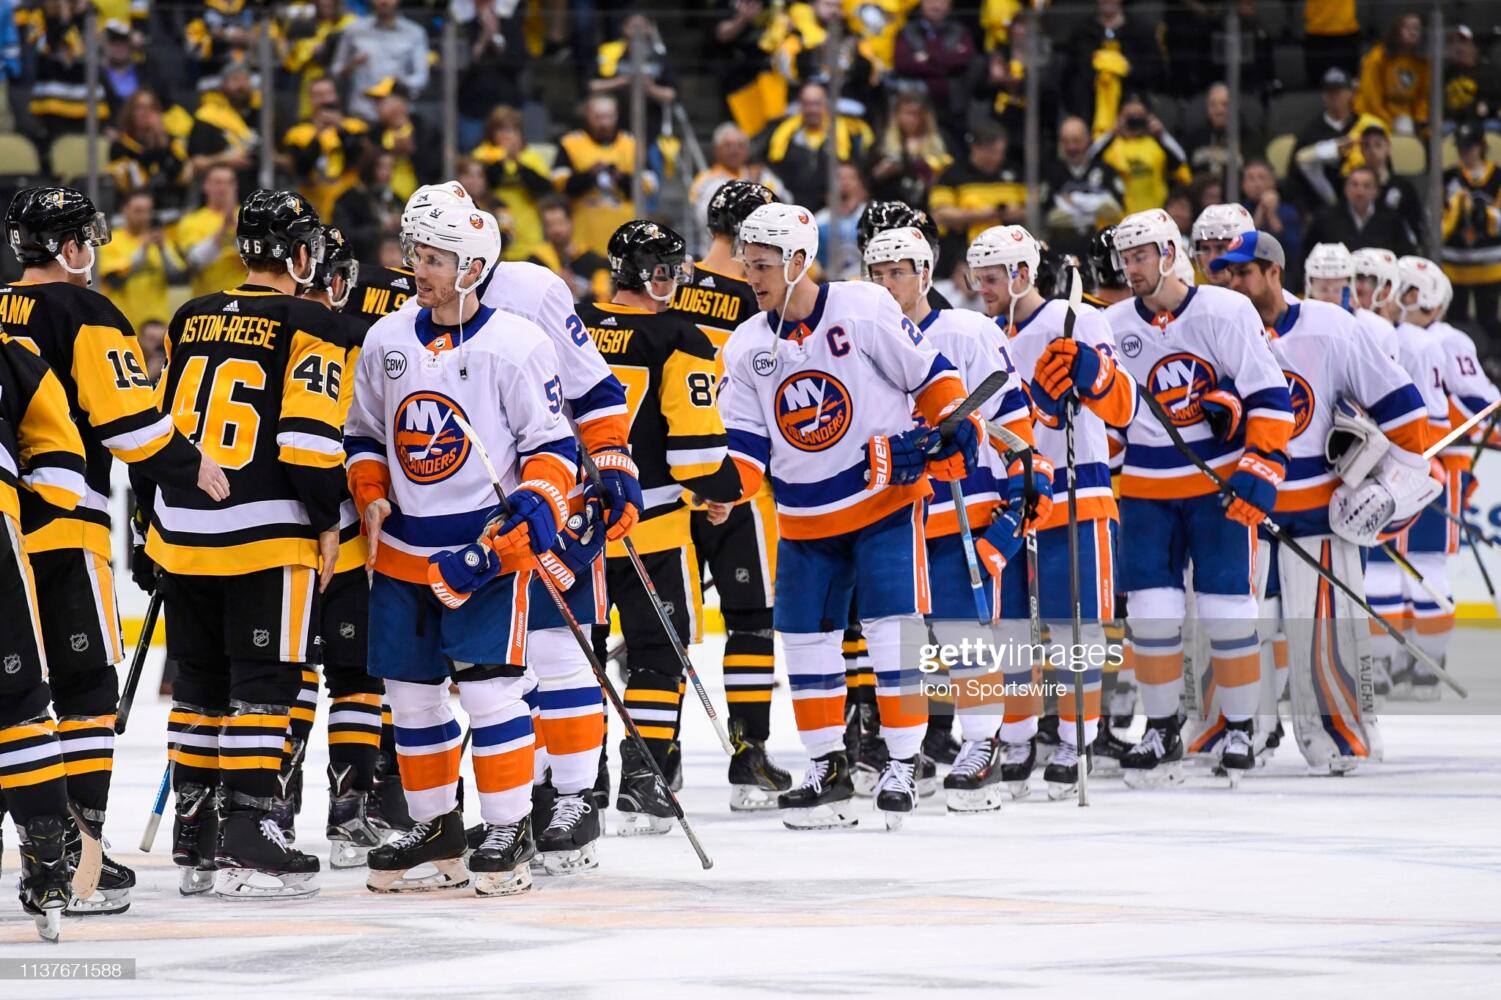 PITTSBURGH, PA - APRIL 16: The New York Islanders and  Pittsburgh Penguins shake hands at the end Game 4 in the First Round of the 2019 NHL Stanley Cup Playoffs between the New York Islanders and the Pittsburgh Penguins on April 16, 2019, at PPG Paints Arena in Pittsburgh, PA. The New York Islanders won the series 4-0. (Photo by Jeanine Leech/Icon Sportswire via Getty Images)